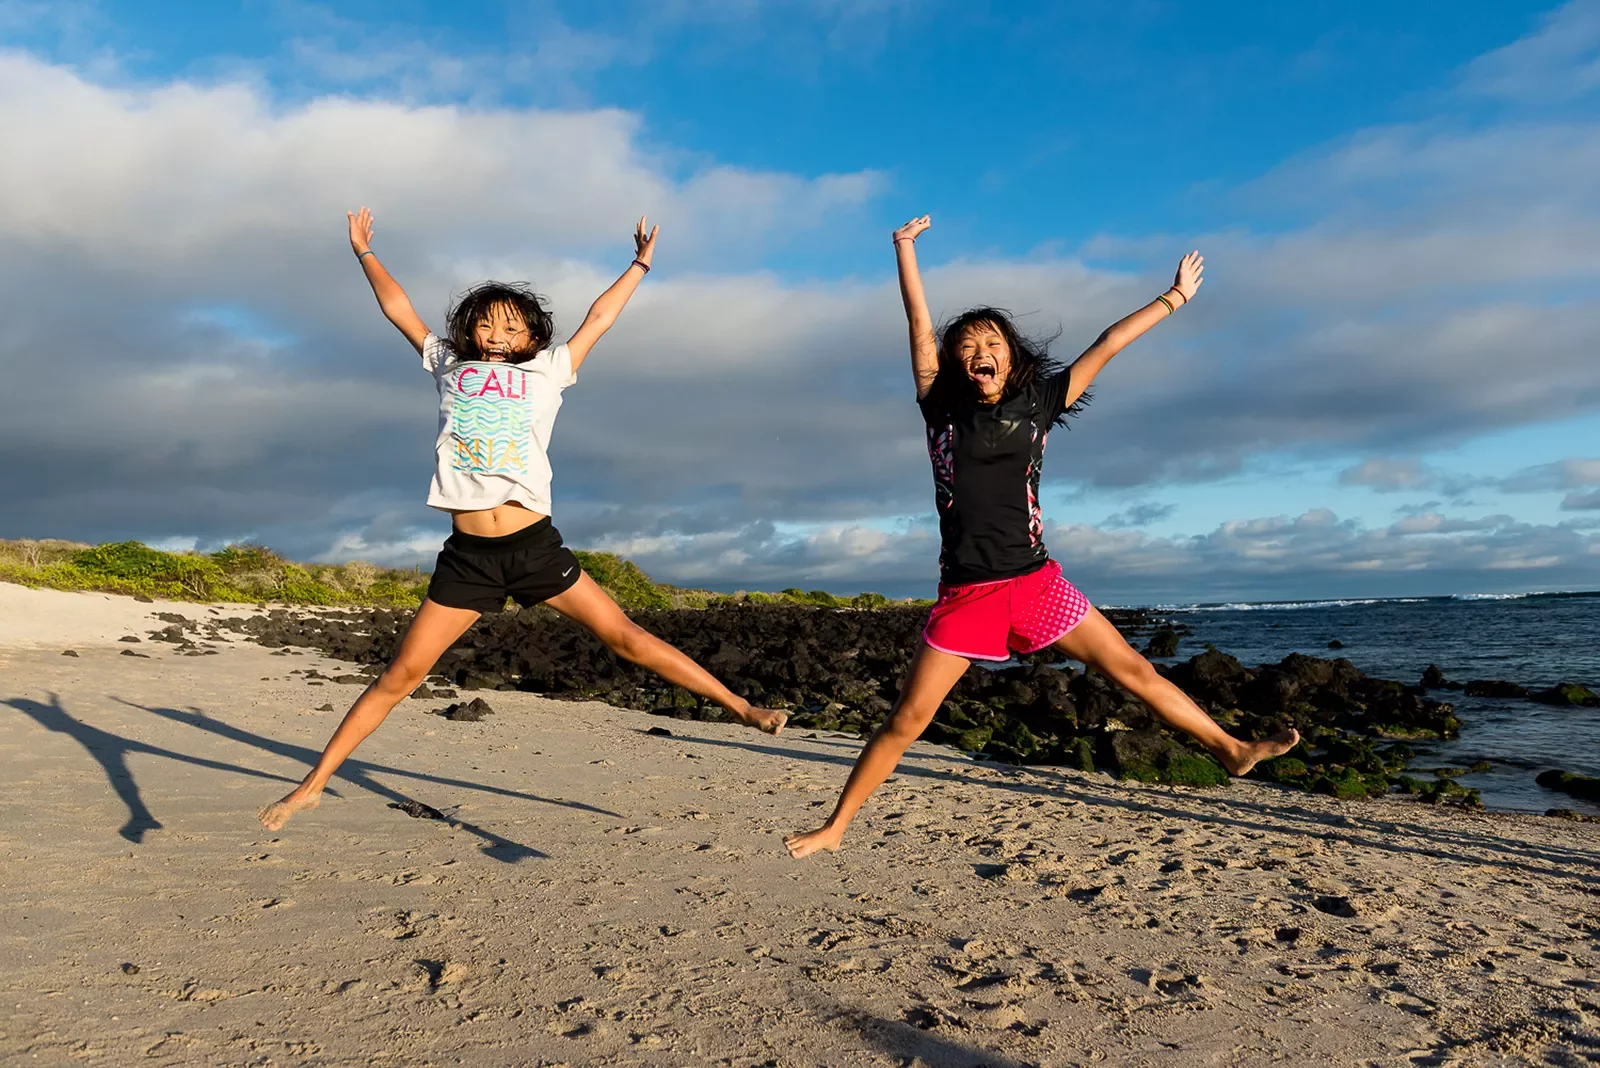 Two girls jumping on a beach